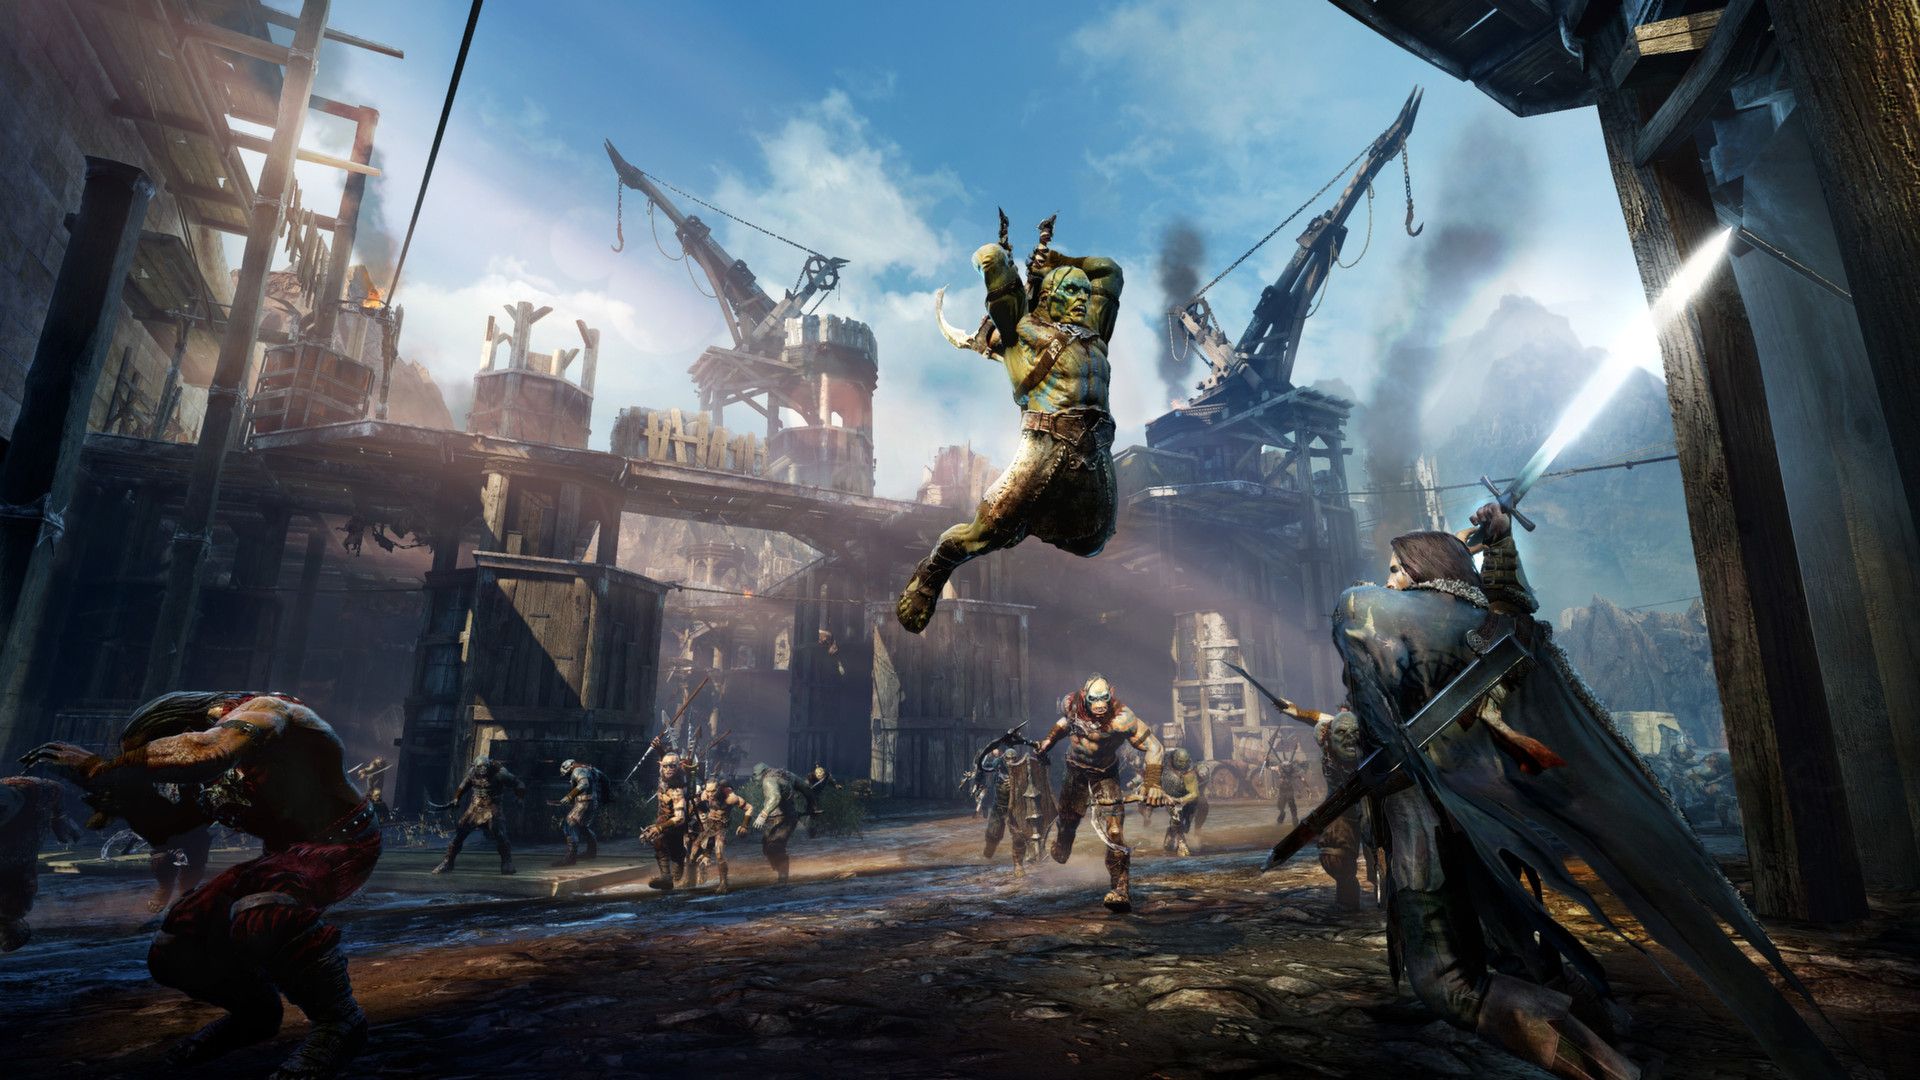 Shadow of Mordor screenshot showing Orcs attacking the player character in the wooden barracks